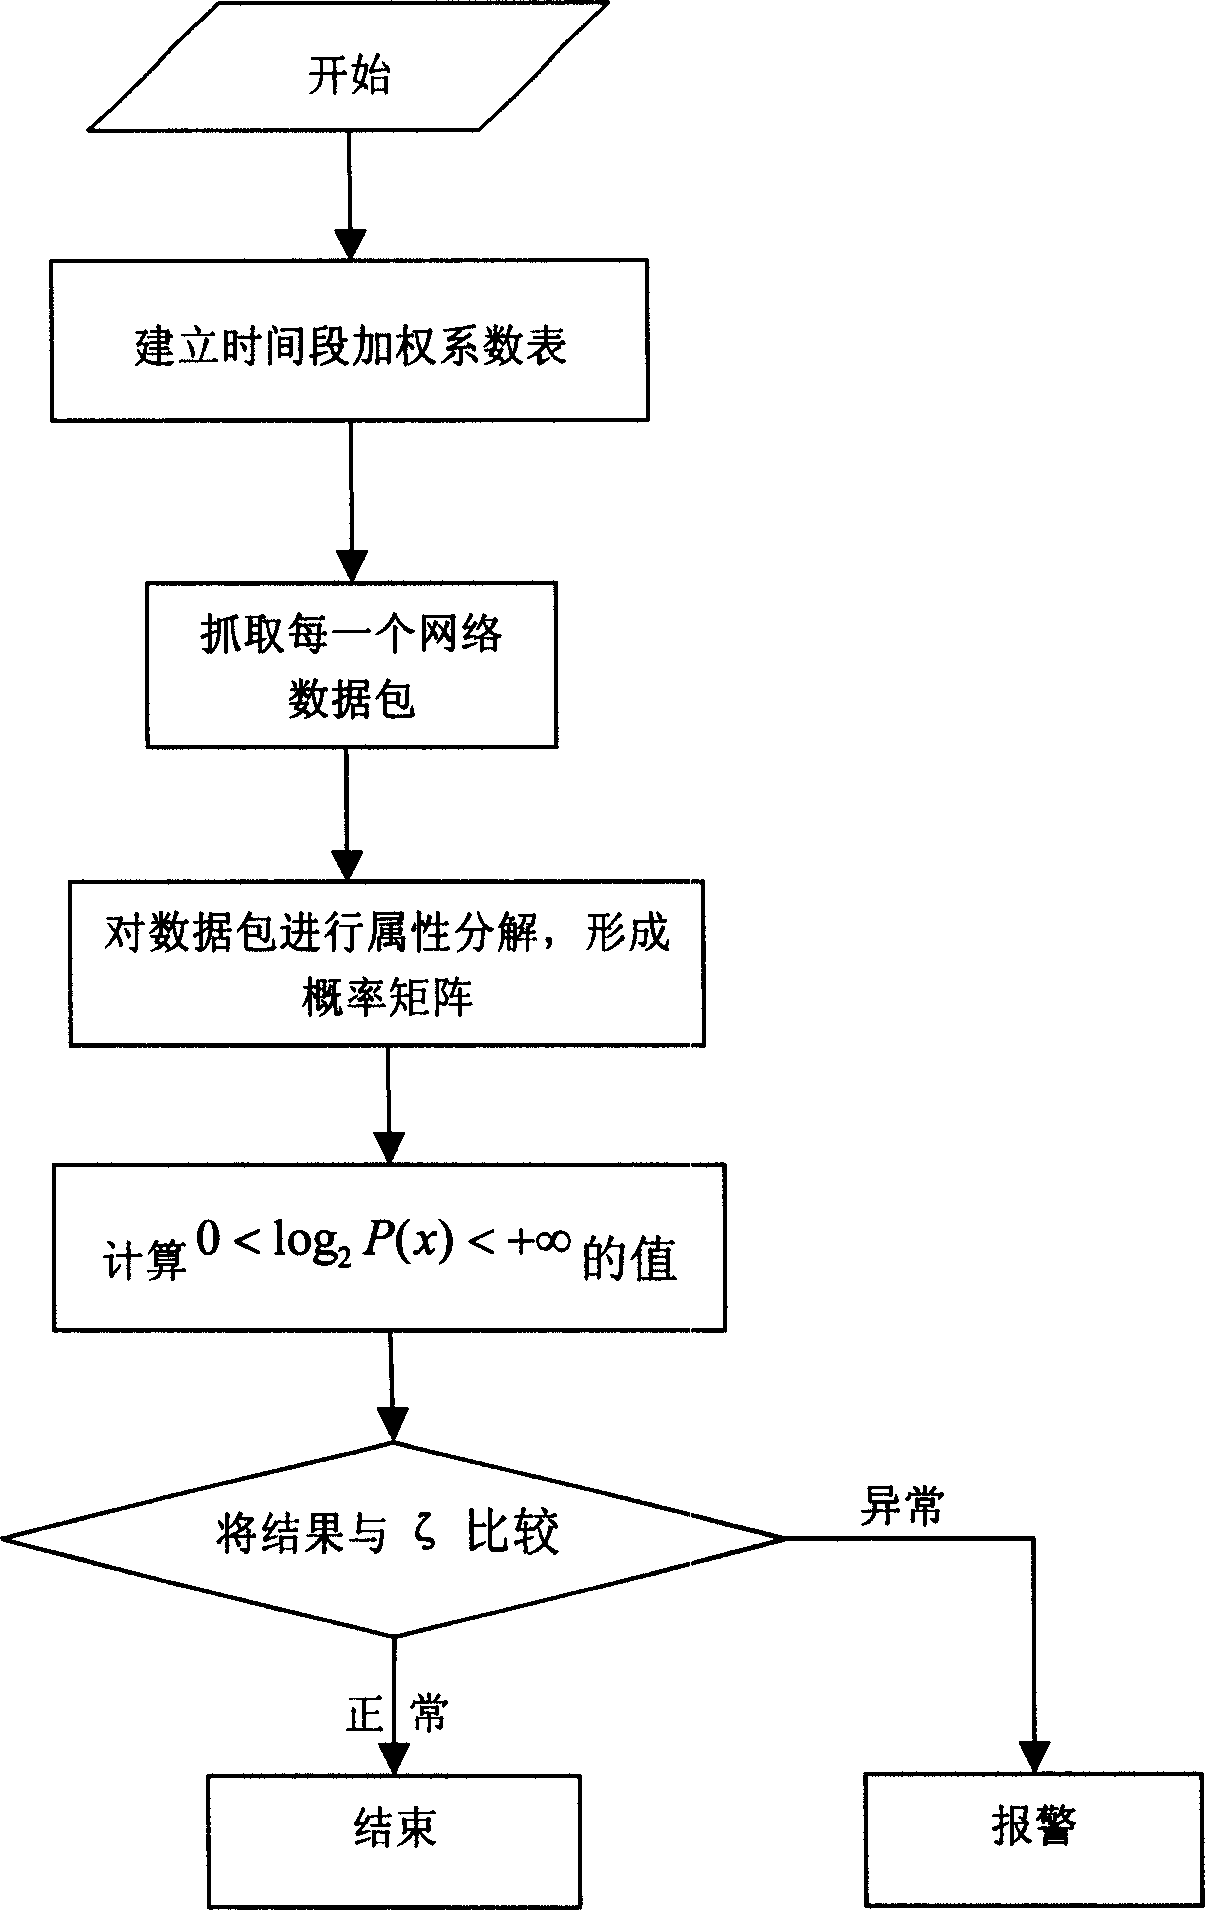 Network abnormal detecting method for weighting statistic model based on time section